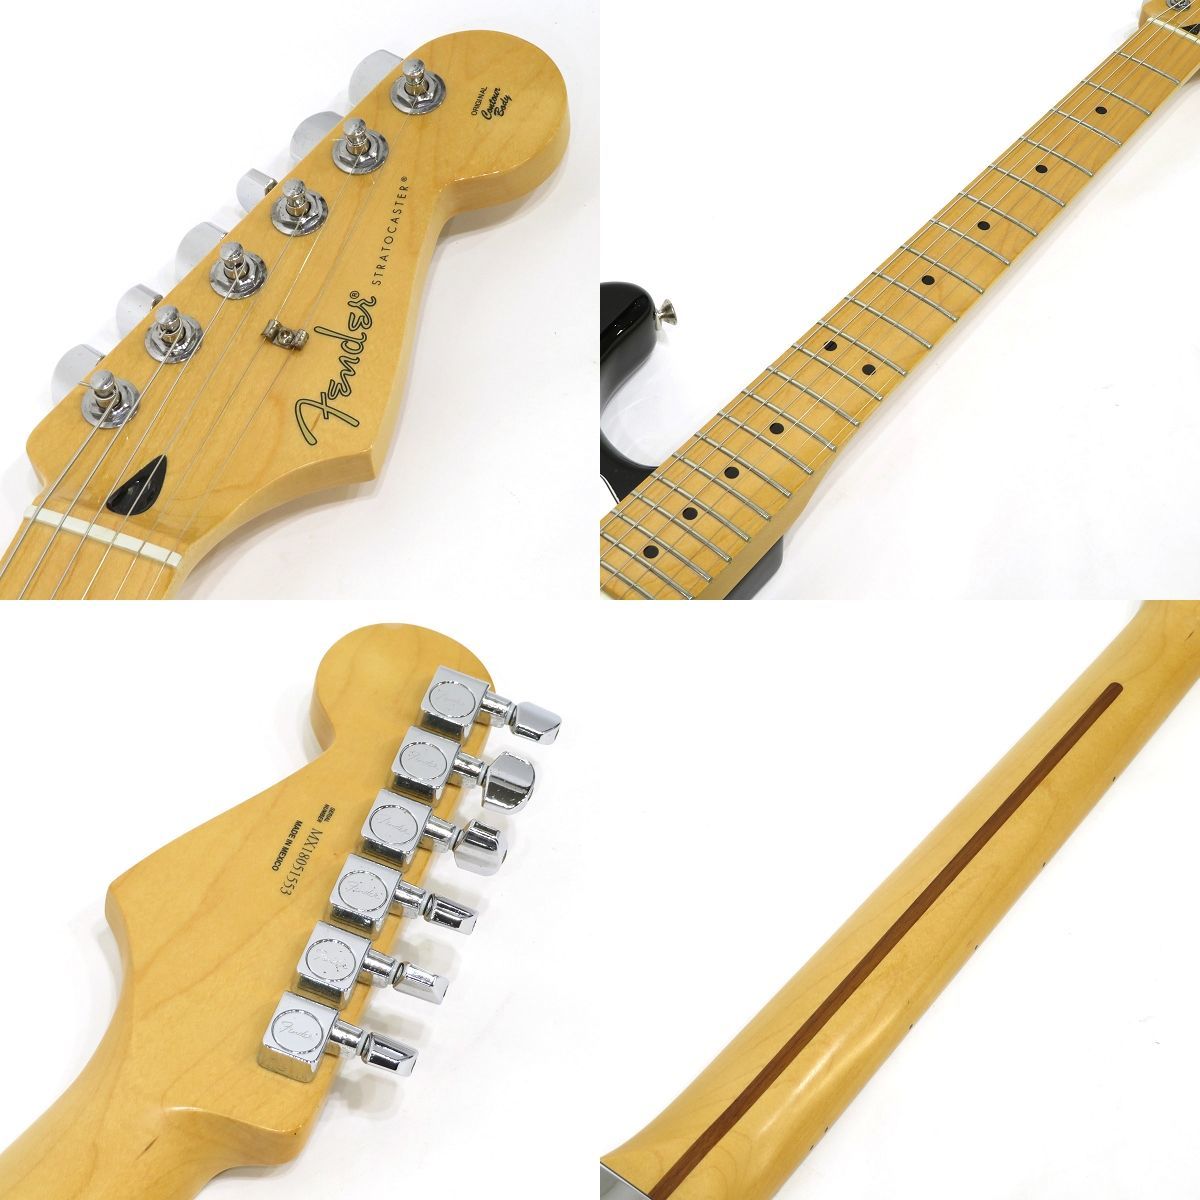 092s☆Fender Mexico フェンダーメキシコ Player Stratocaster HSS